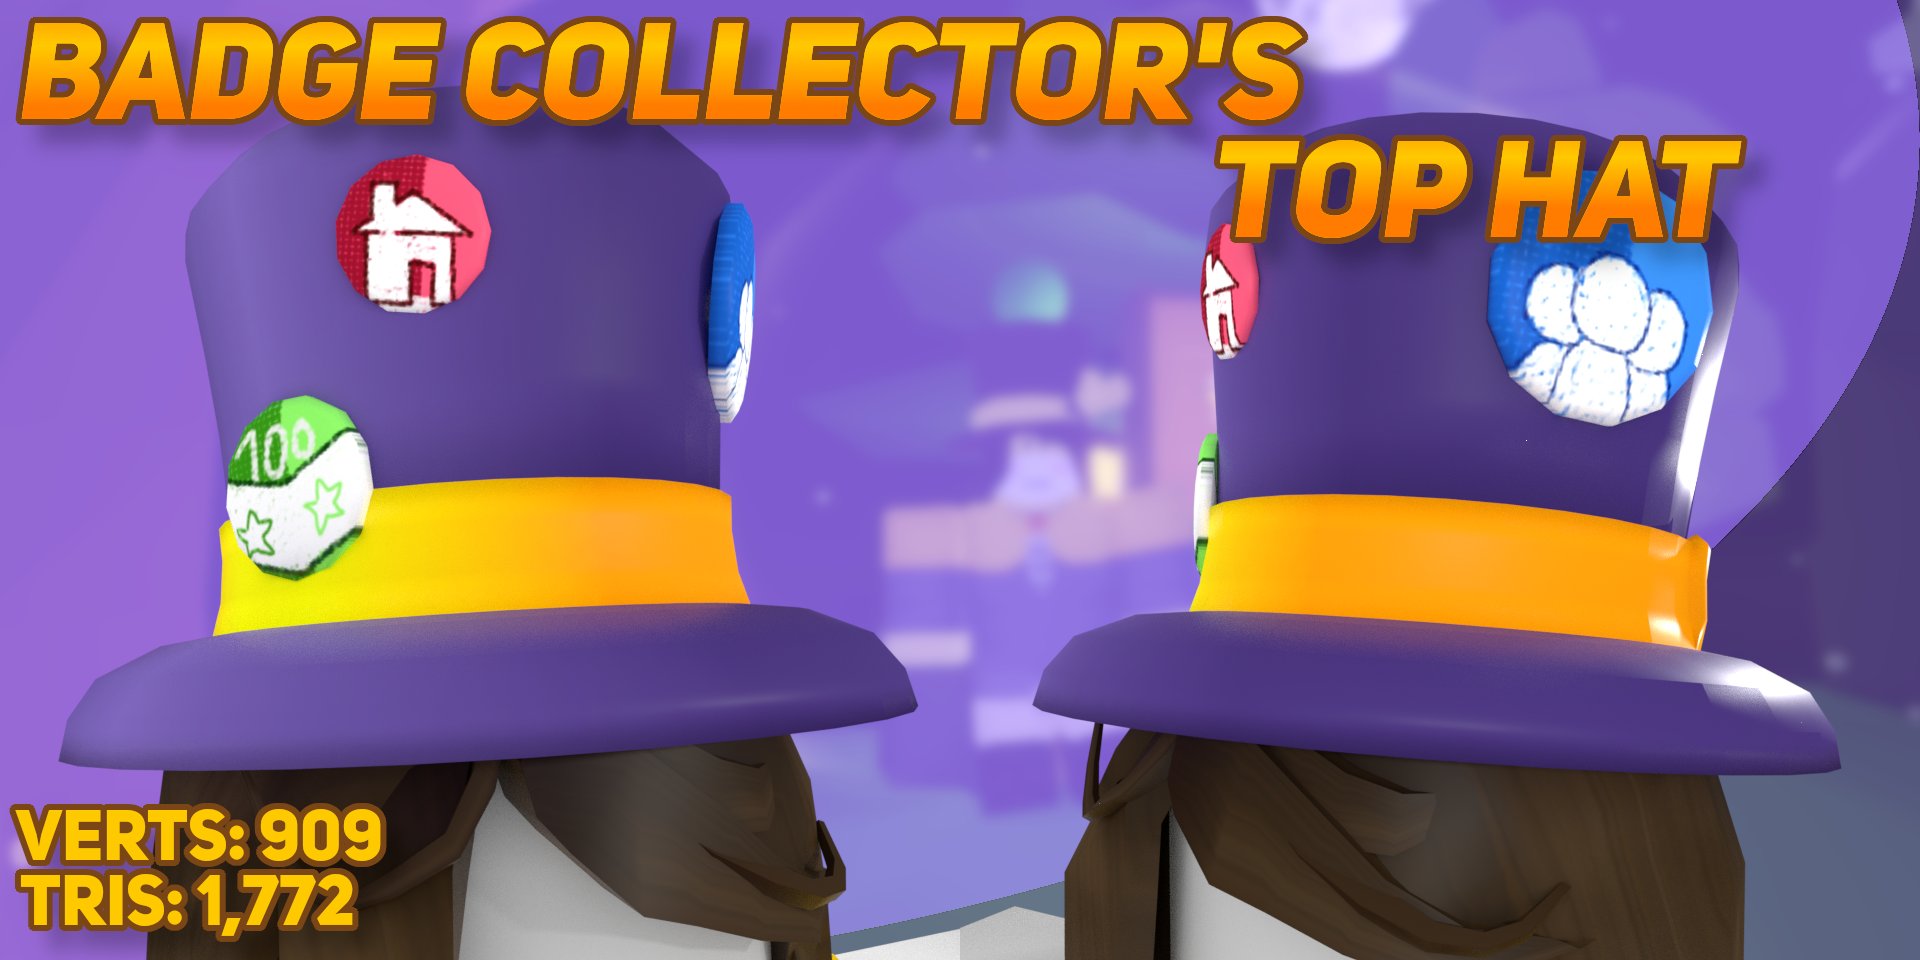 Belownatural On Twitter Gotta Collect Those Badges Presenting The Badge Collector S Top Hat Now You Can Fully Cosplay As Your Favorite Kid With A Hat Once I Get Ugc Access - video creator top hat roblox